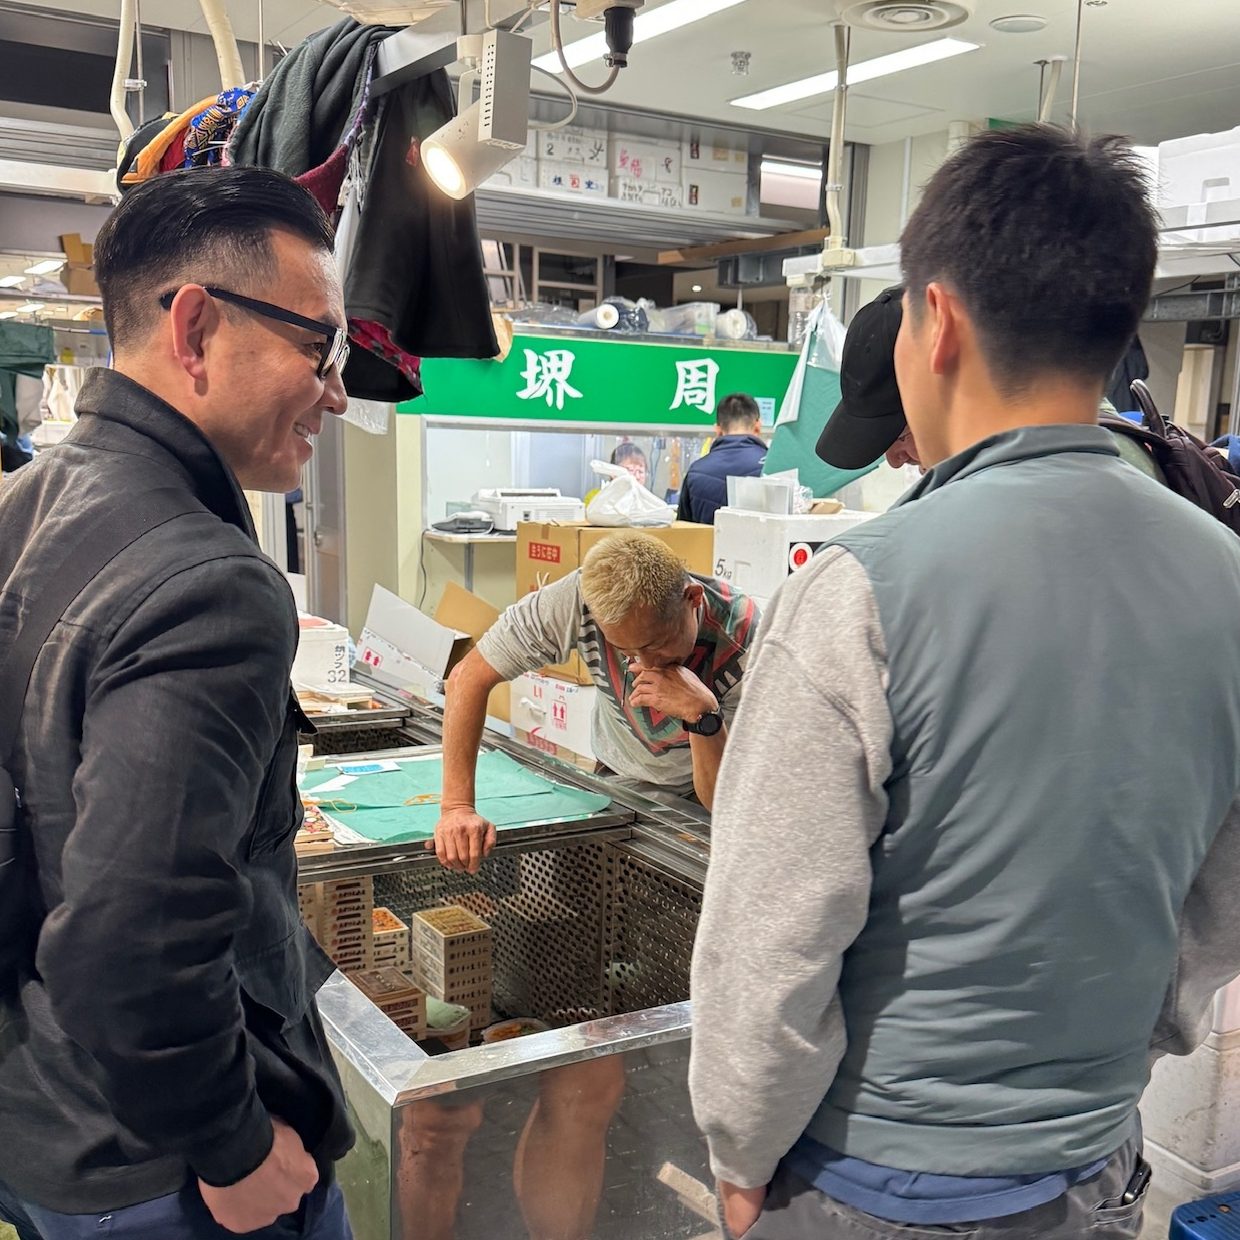 Two men are talking to a fish vendor in an indoor market. The vendor is leaning over a tank, while the men observe. The area is well-lit and busy.